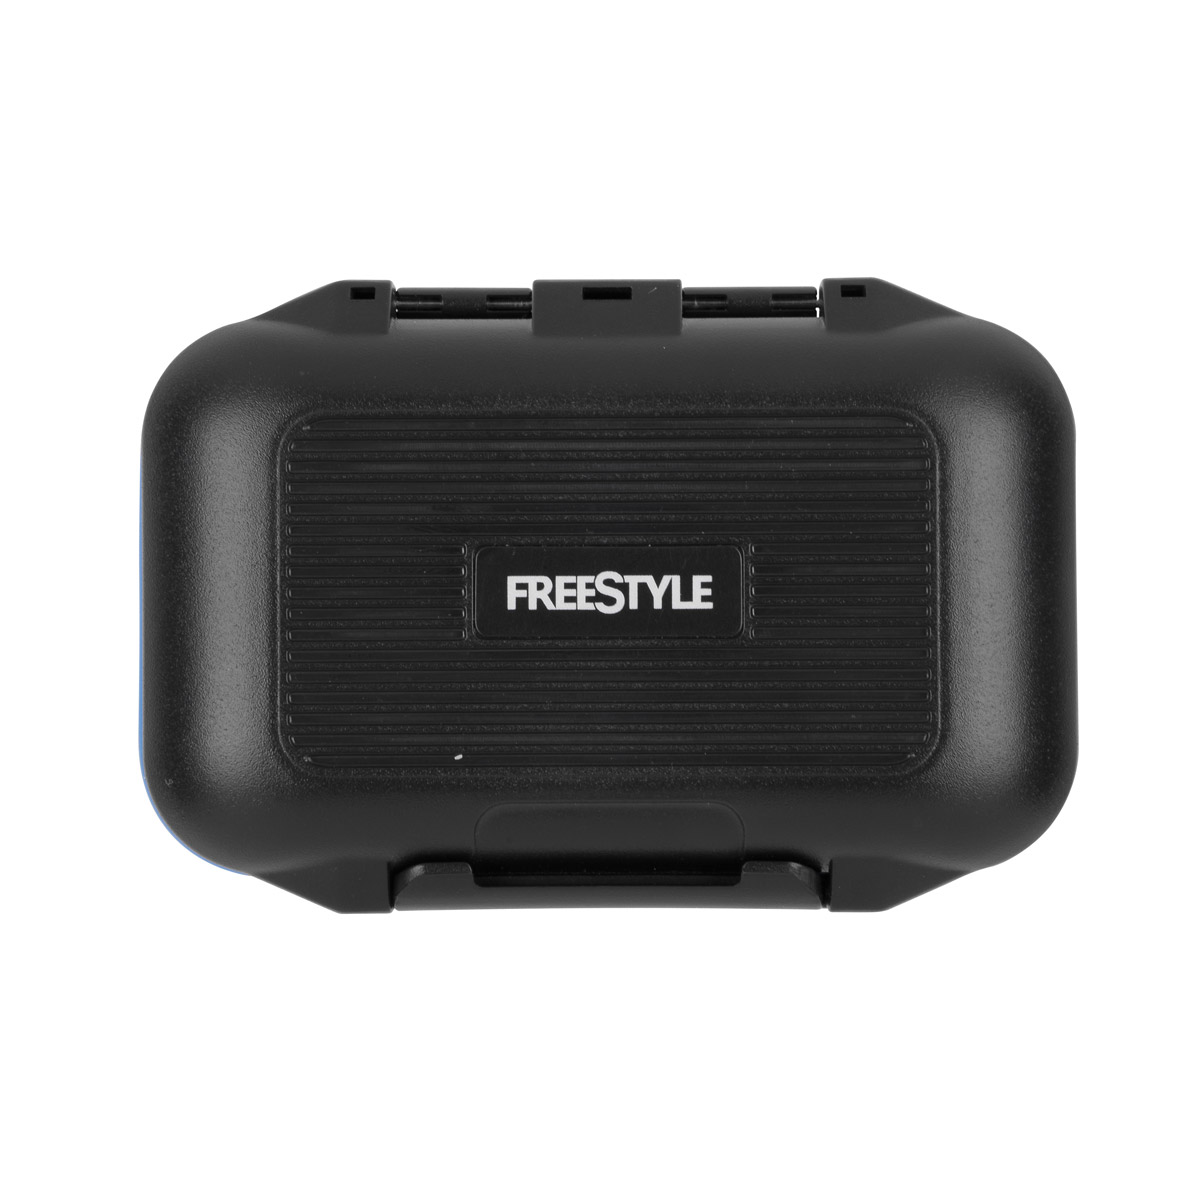 Spro freestyle reload rigged box s